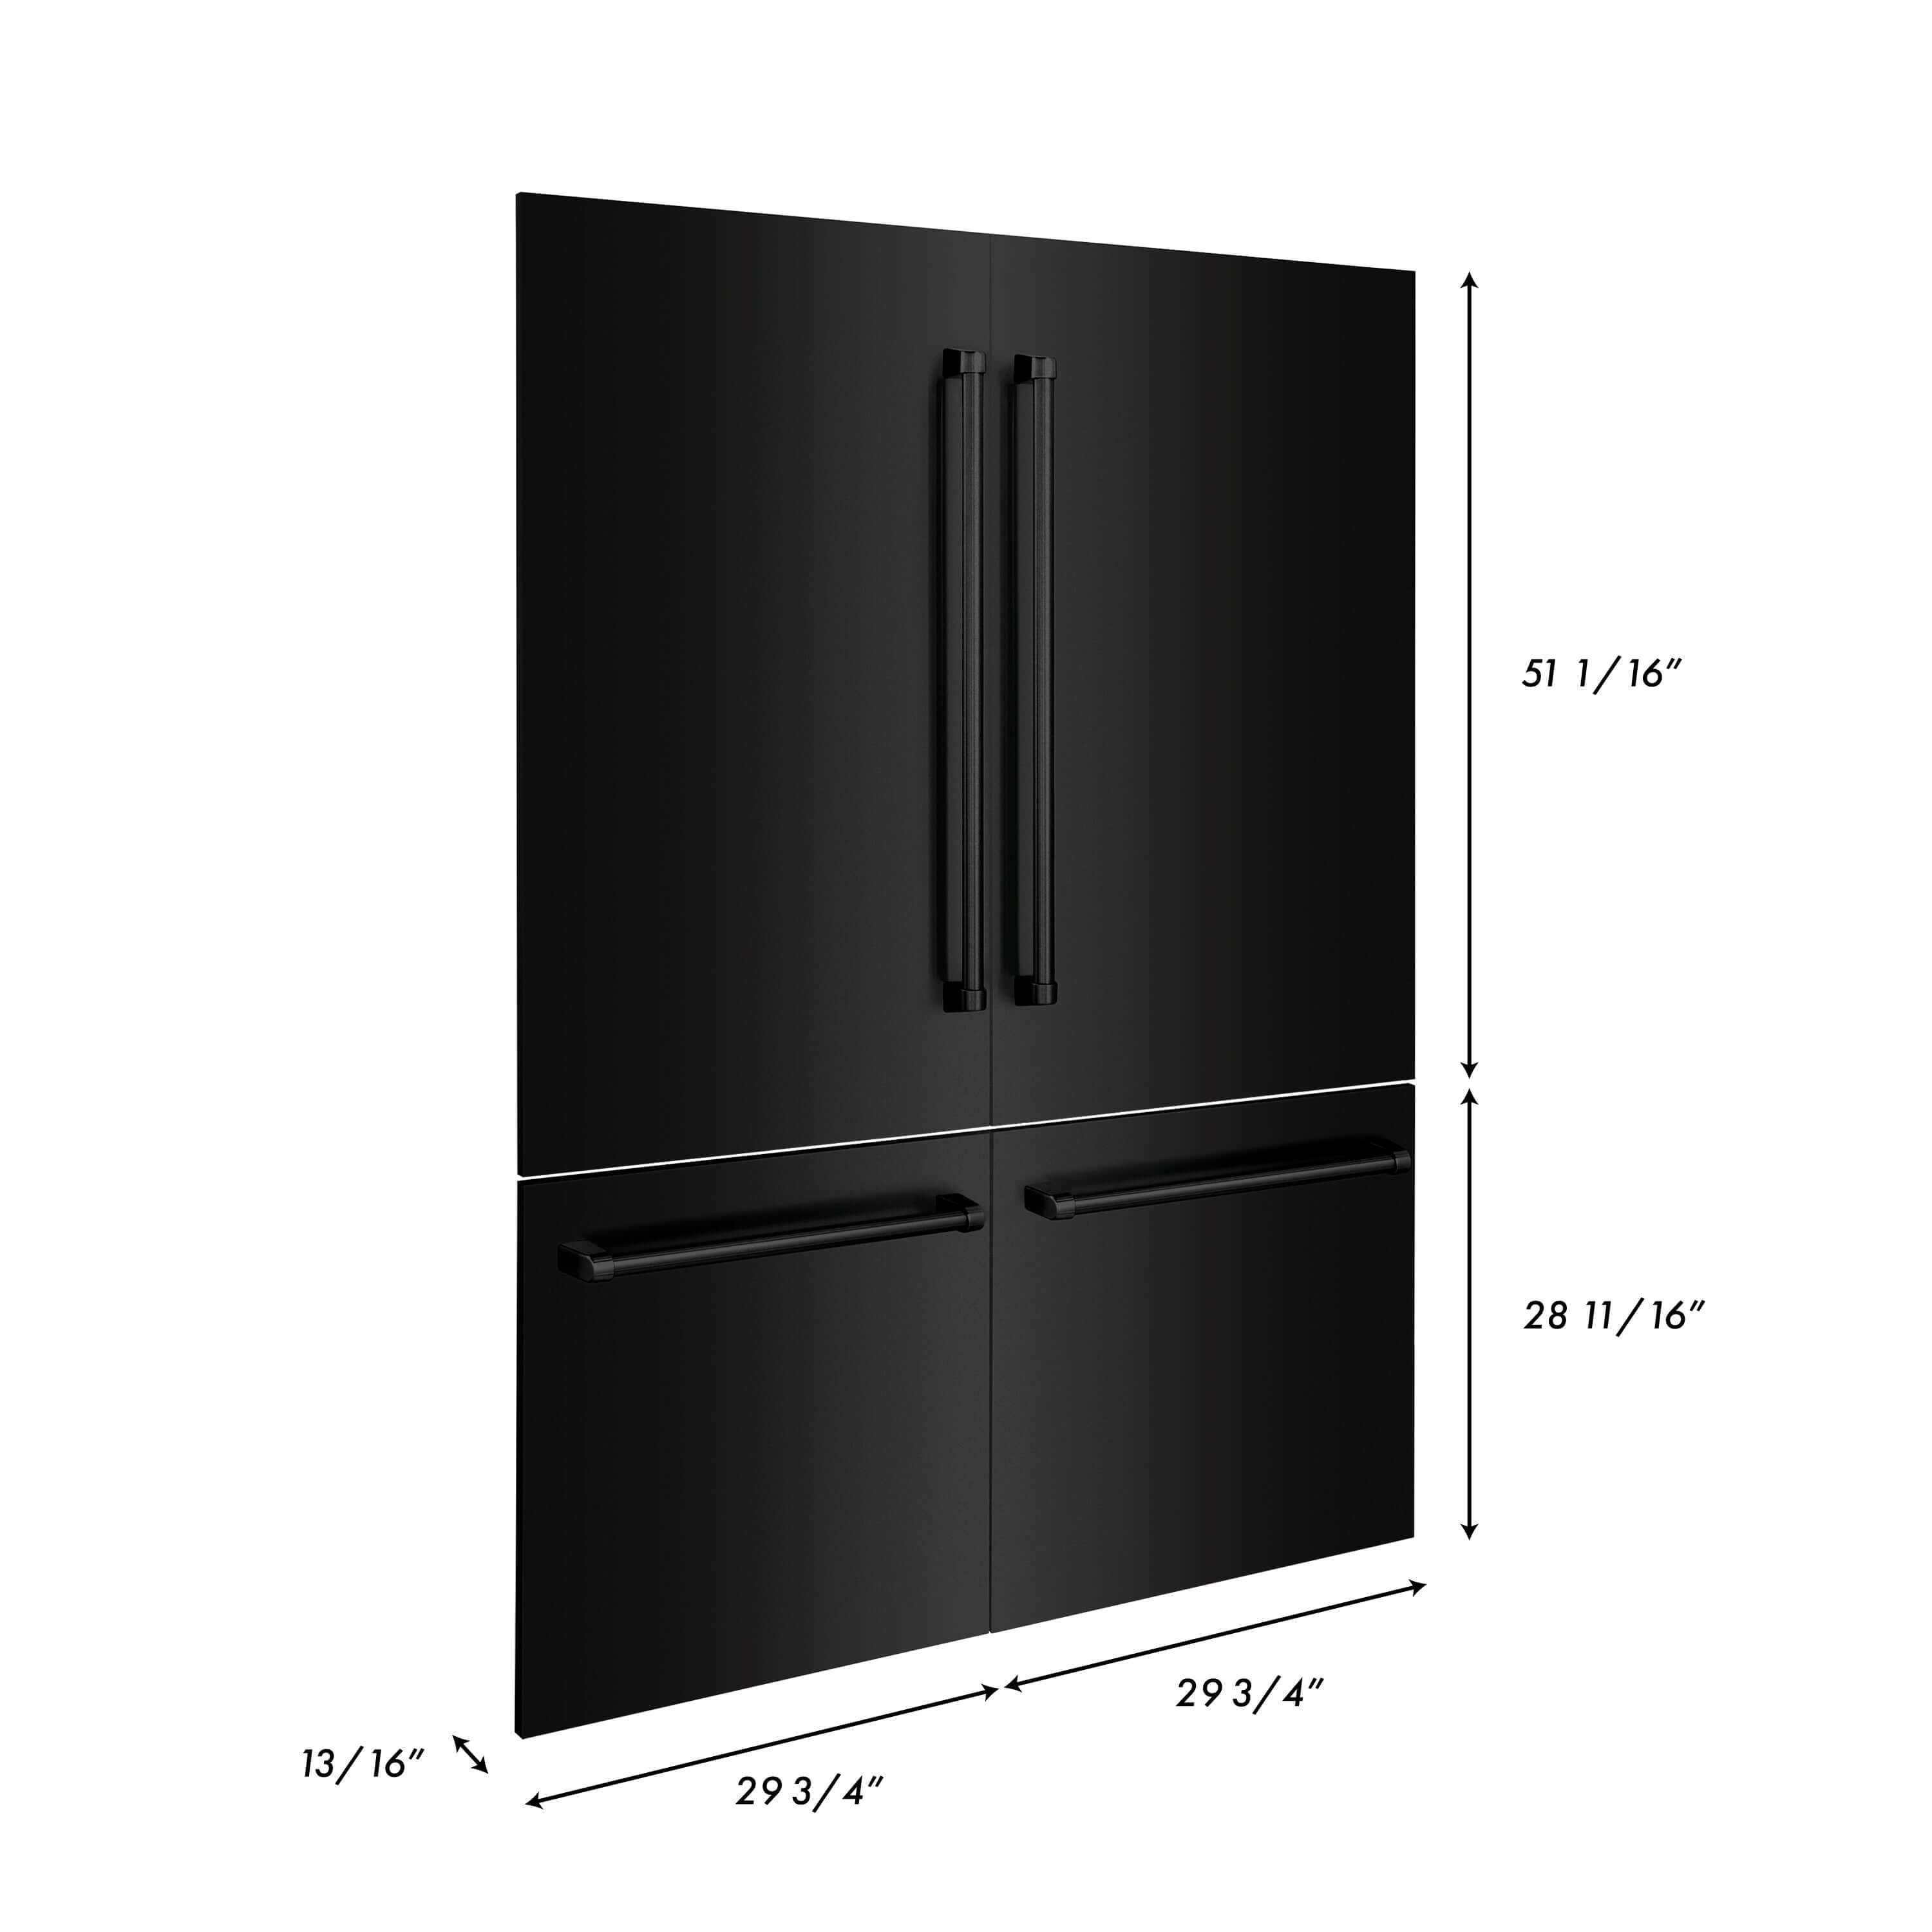 Panels & Handles Only- ZLINE 60 in. Refrigerator Panels in Black Stainless Steel for a 60 in. Built-in Refrigerator (RPBIV-BS-60) dimensional diagram with measurements.